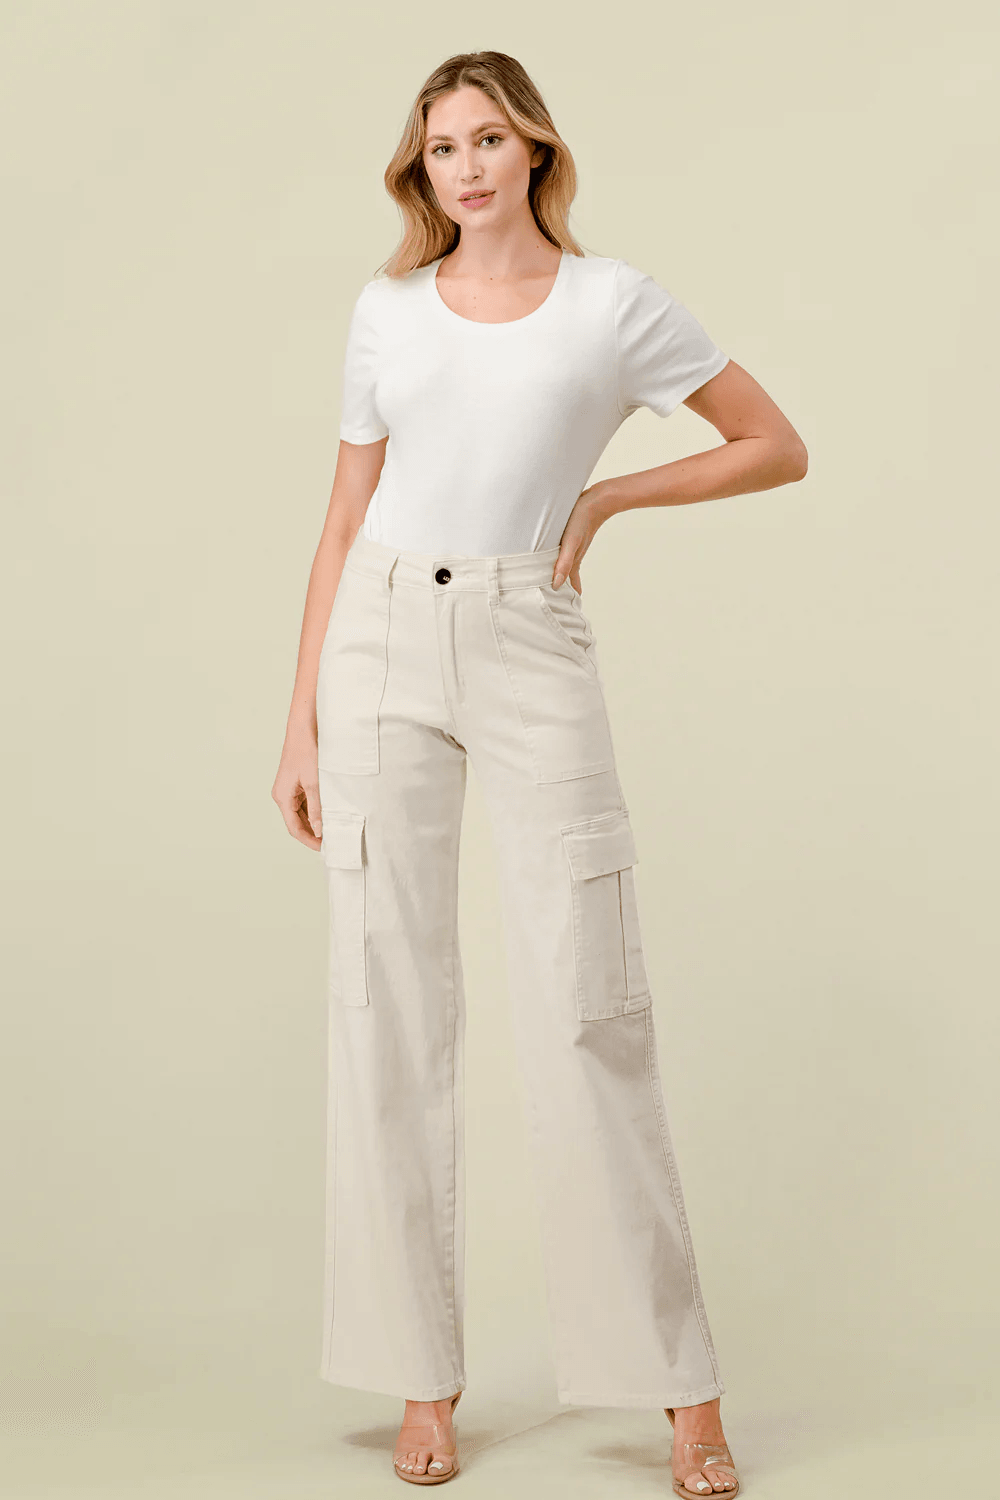 Cute In Cargo Pants - Lady Dorothy Boutique